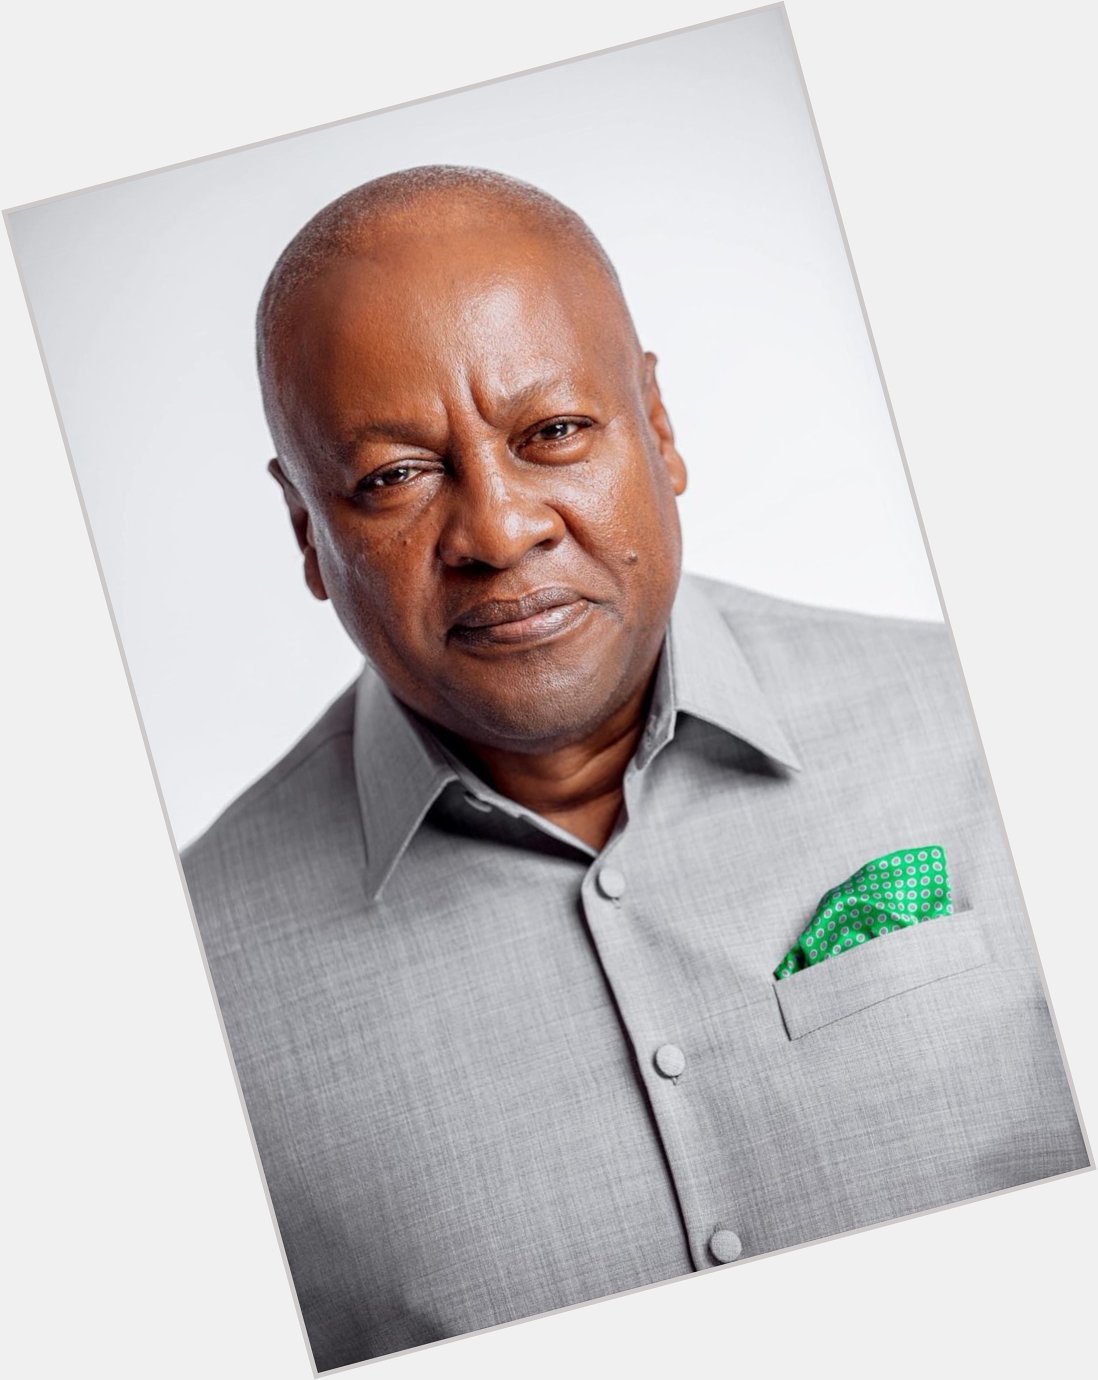 Happy birthday Your Excellency John Dramani Mahama.

May you age gracefully in good health and joy. 